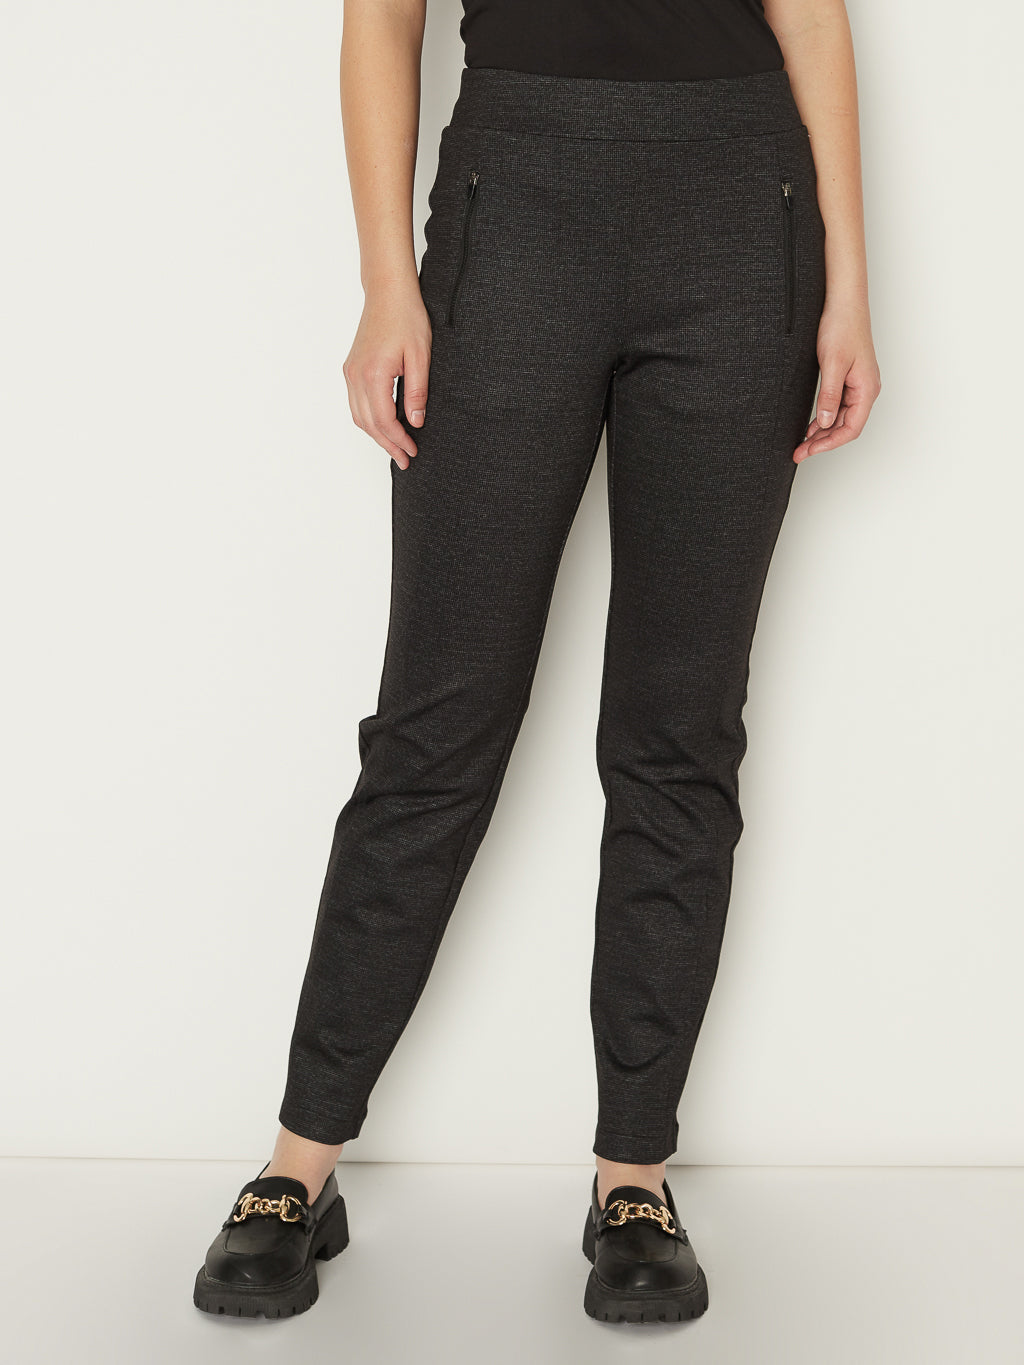 Narrow pull-on ankle pant – Le Grenier